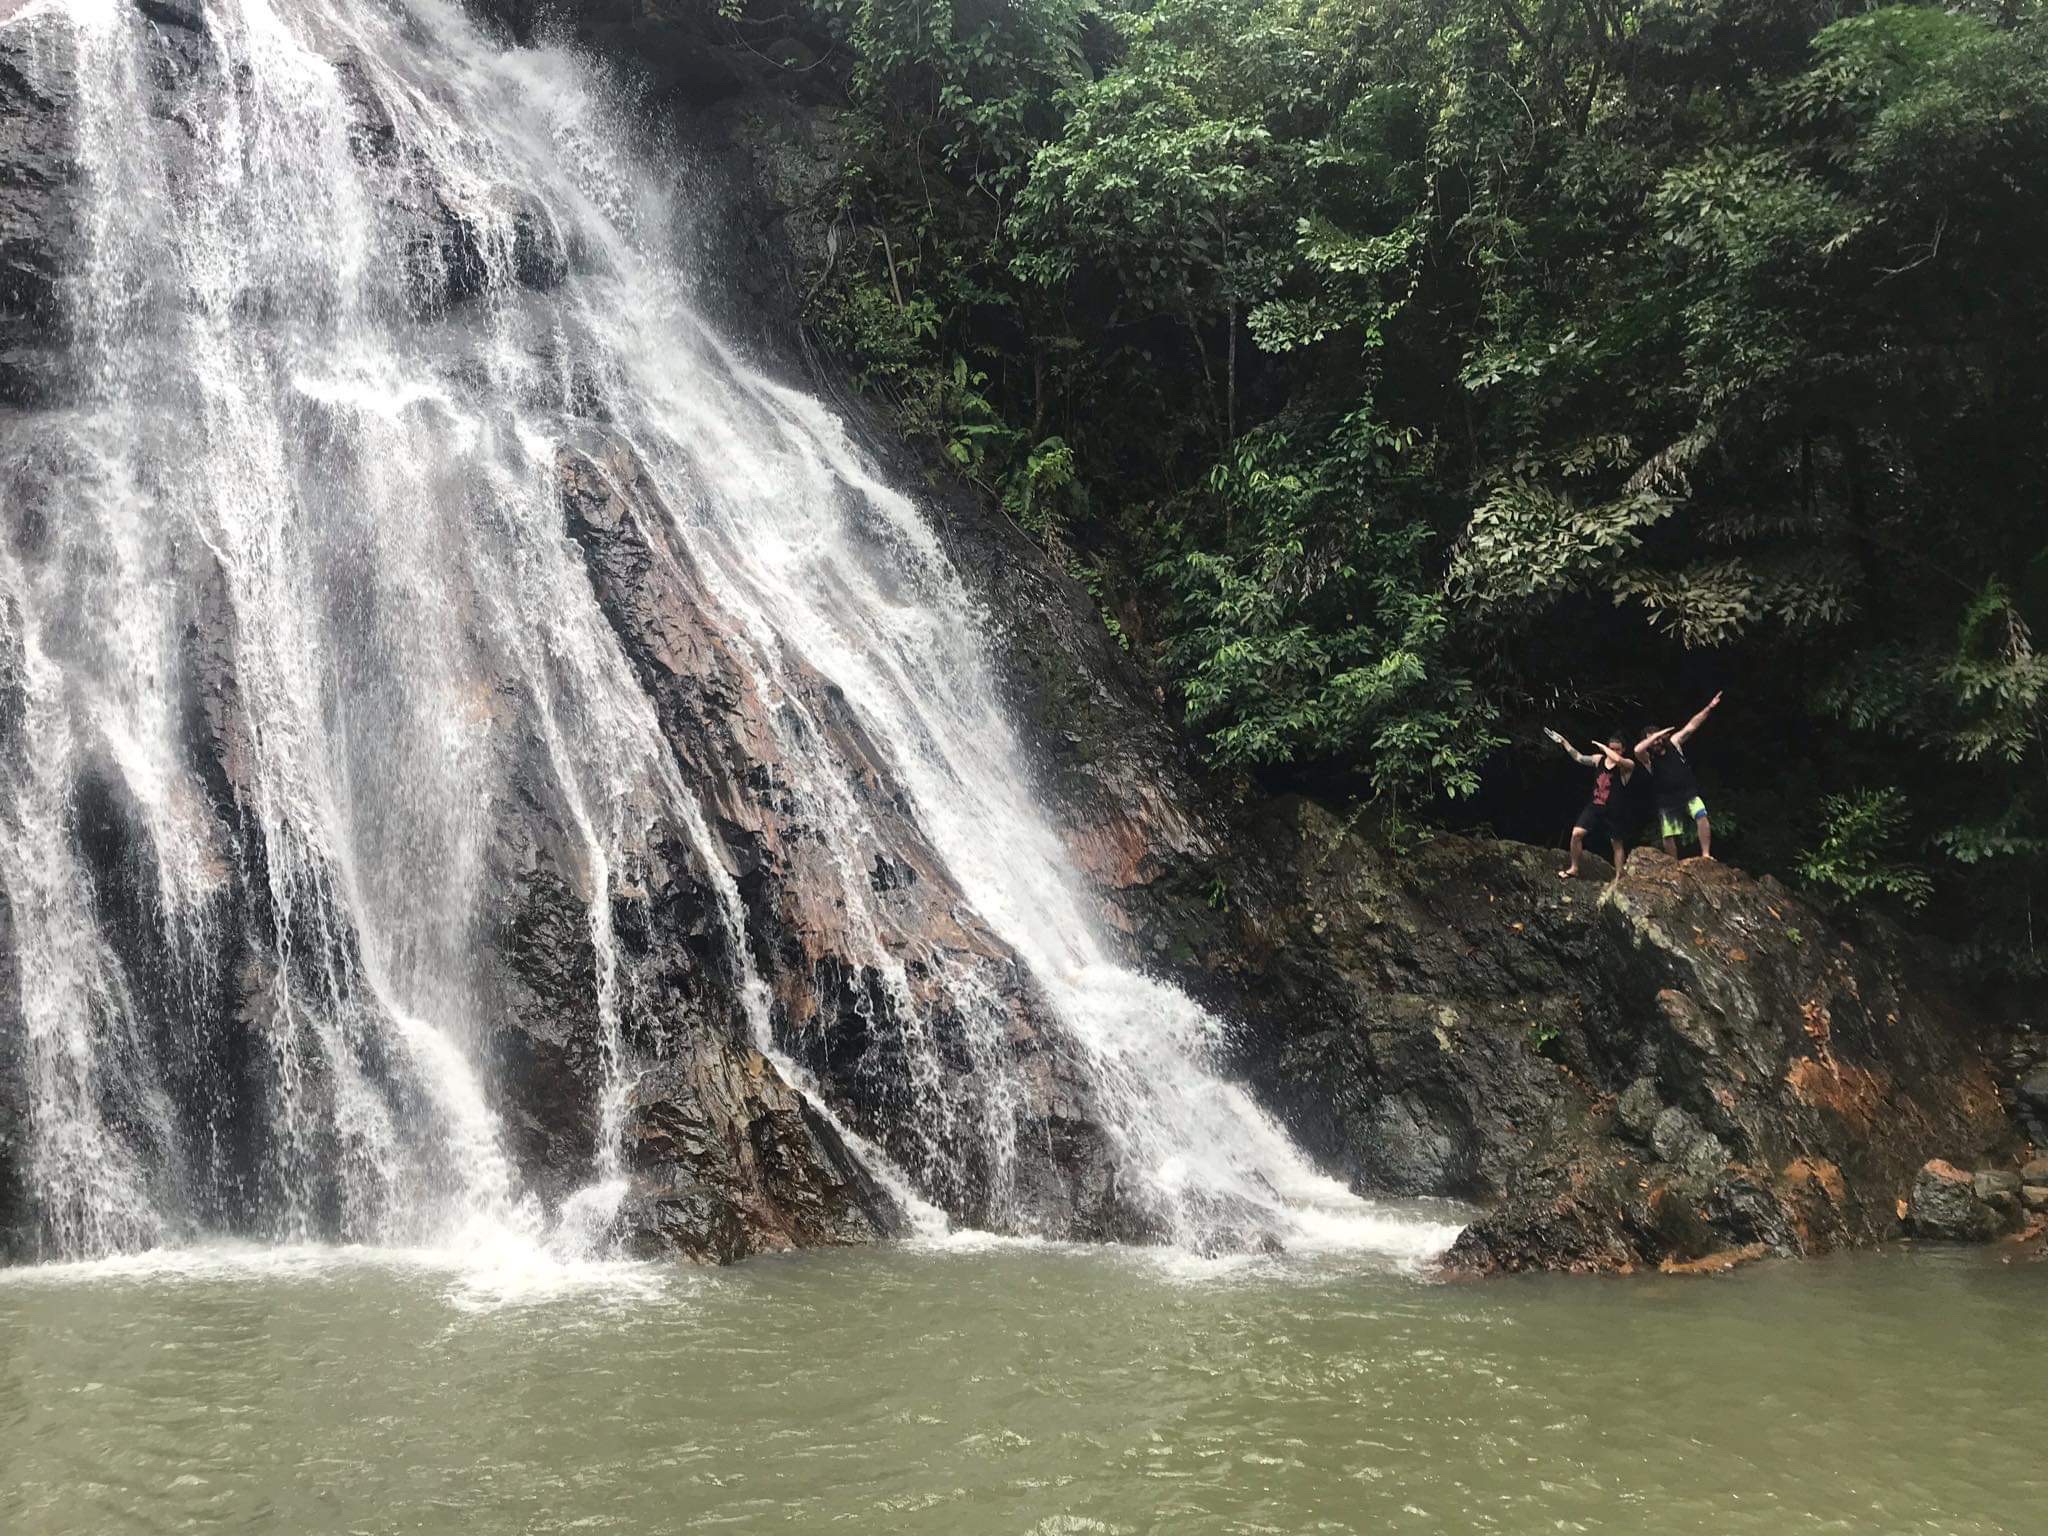 My 2 brothers “dabbing” at the side of the Na Mueang waterfalls, Koh Samui. 